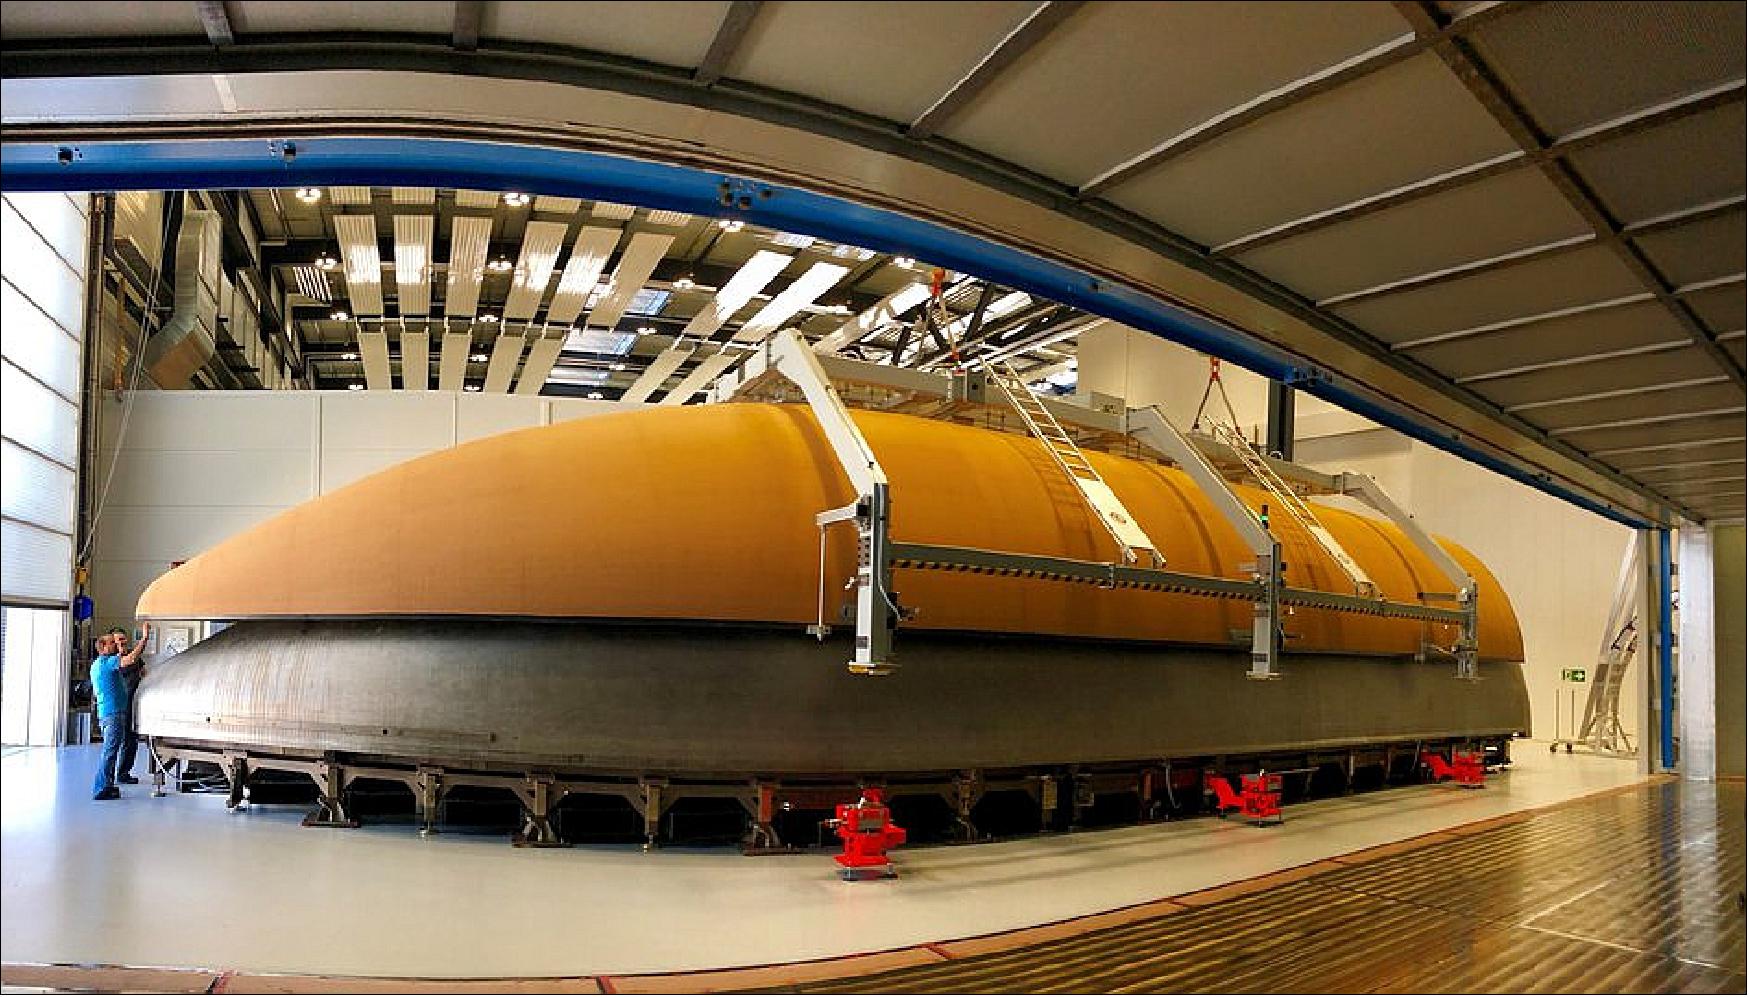 Figure 72: With the help of ESA, RUAG Space developed an out-of-autoclave process where the carbon-fibre shells of the rocket fairing are cured in an industrial oven instead of an autoclave. It reduces cost and saves time. - The first fairing manufactured in this way was flown on Ariane 5, flight VA238 on 28 June 2017. Vega began using the new type of fairing on 1 August 2017. Ariane 6 and Vega-C fairings will also be produced in the same way. The first half-shell of Ariane 6 (pictured) has been made [image credit: RUAG Space (Switzerland)] 57)